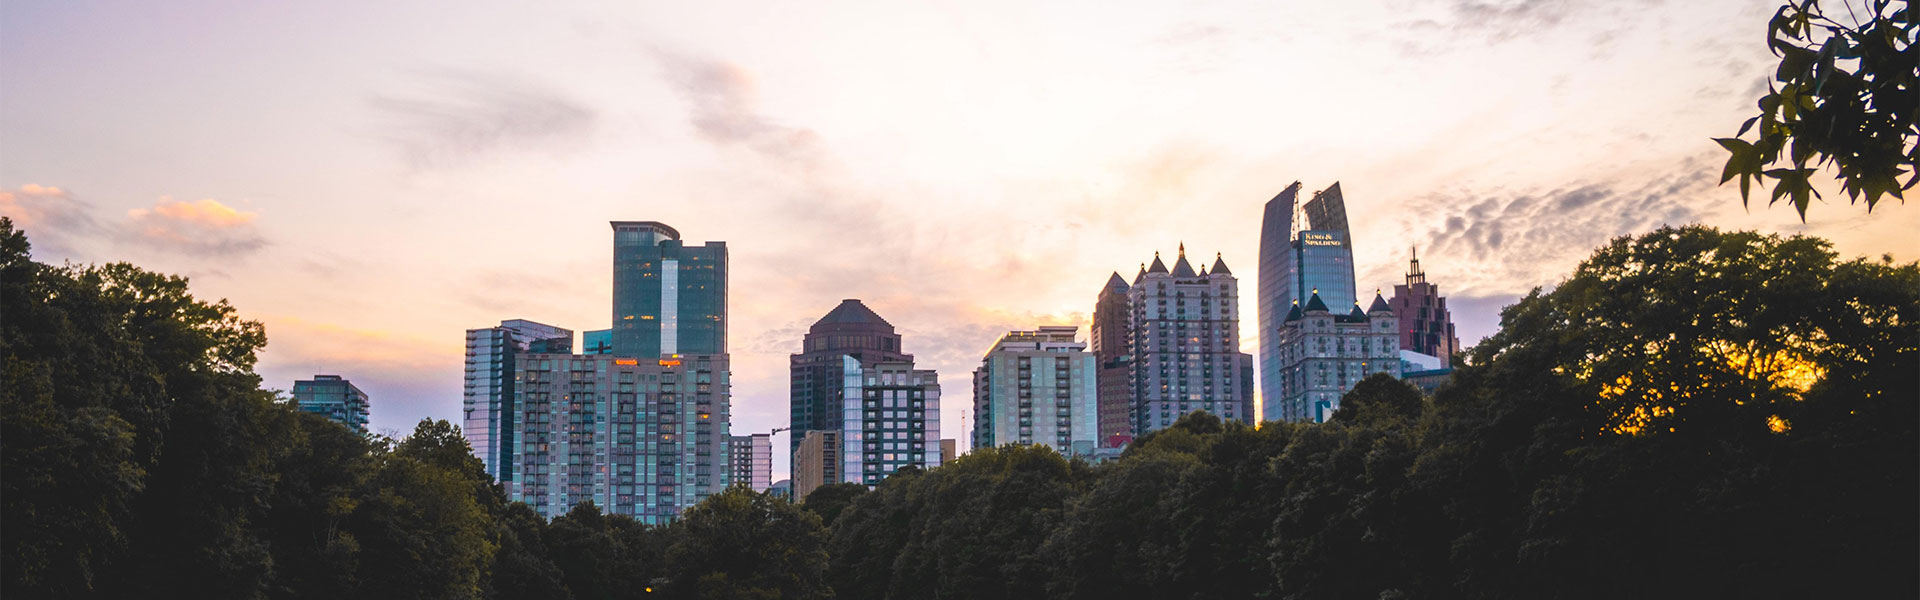 The Atlanta skyline against water and trees